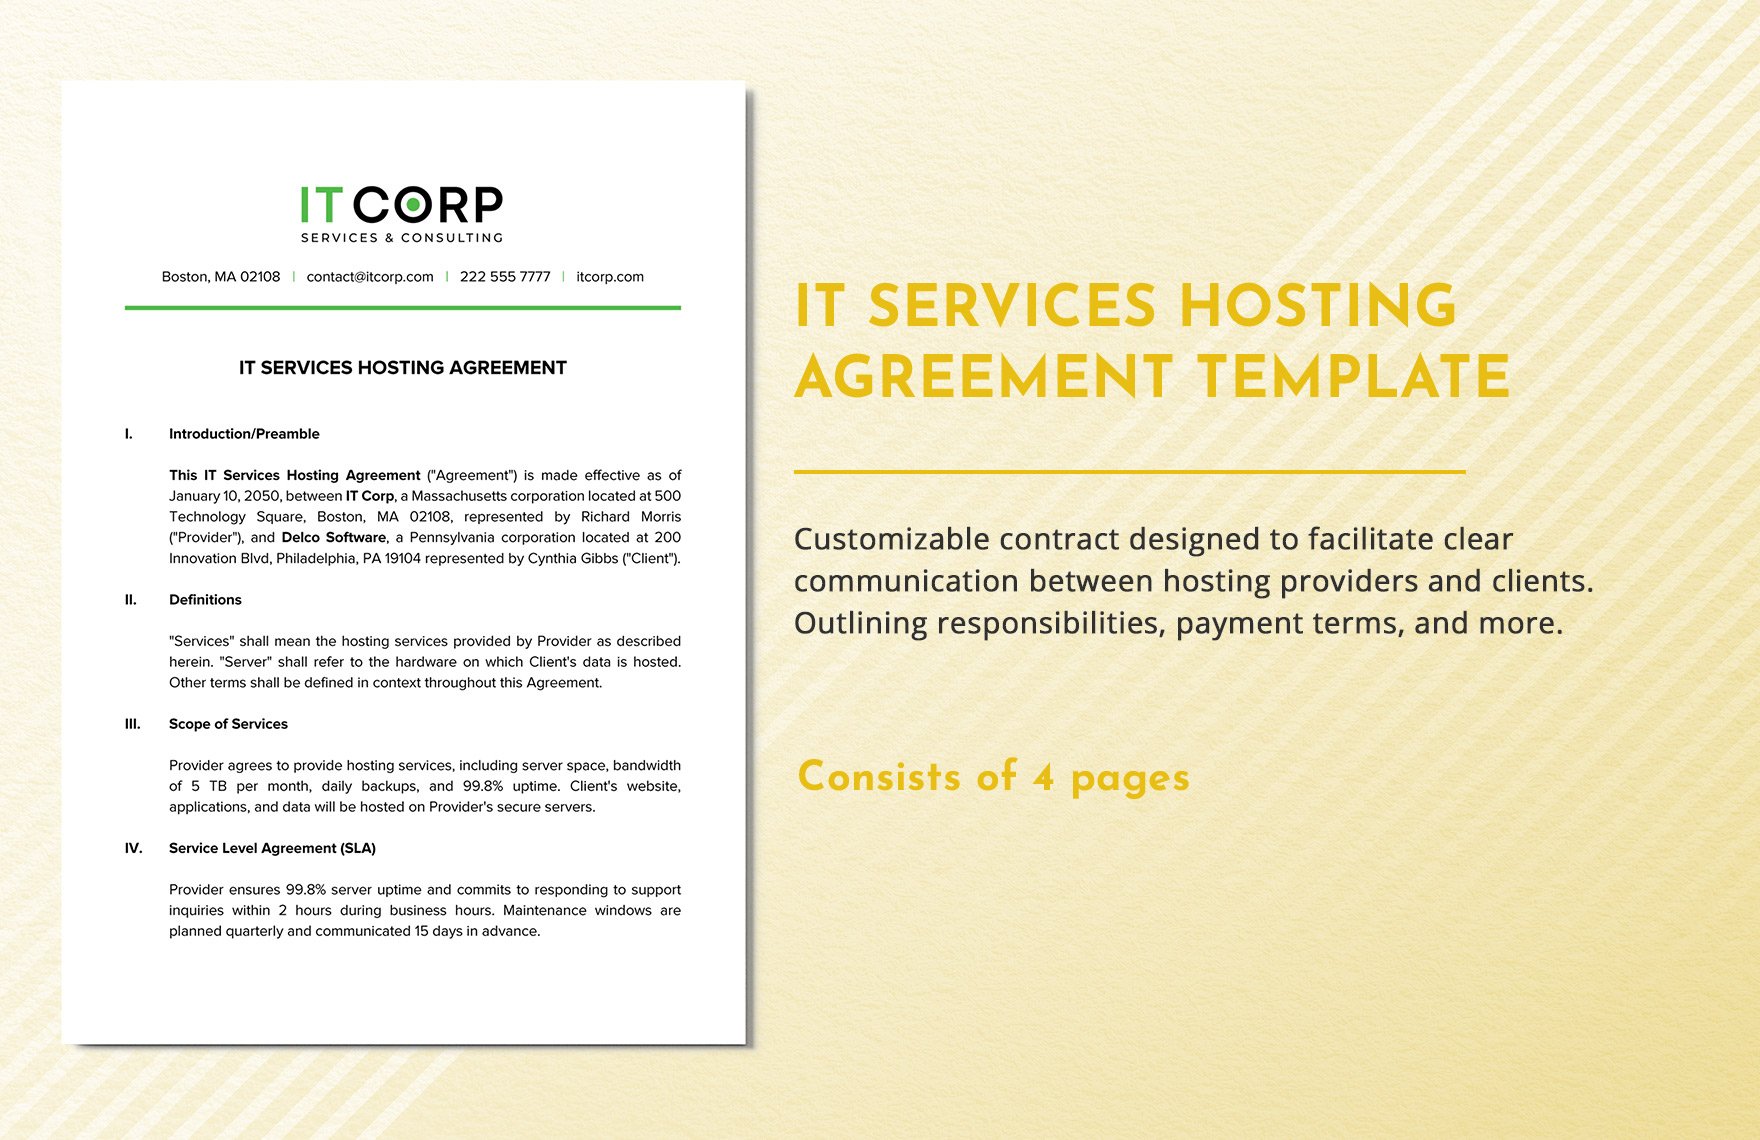 IT Services Hosting Agreement Template